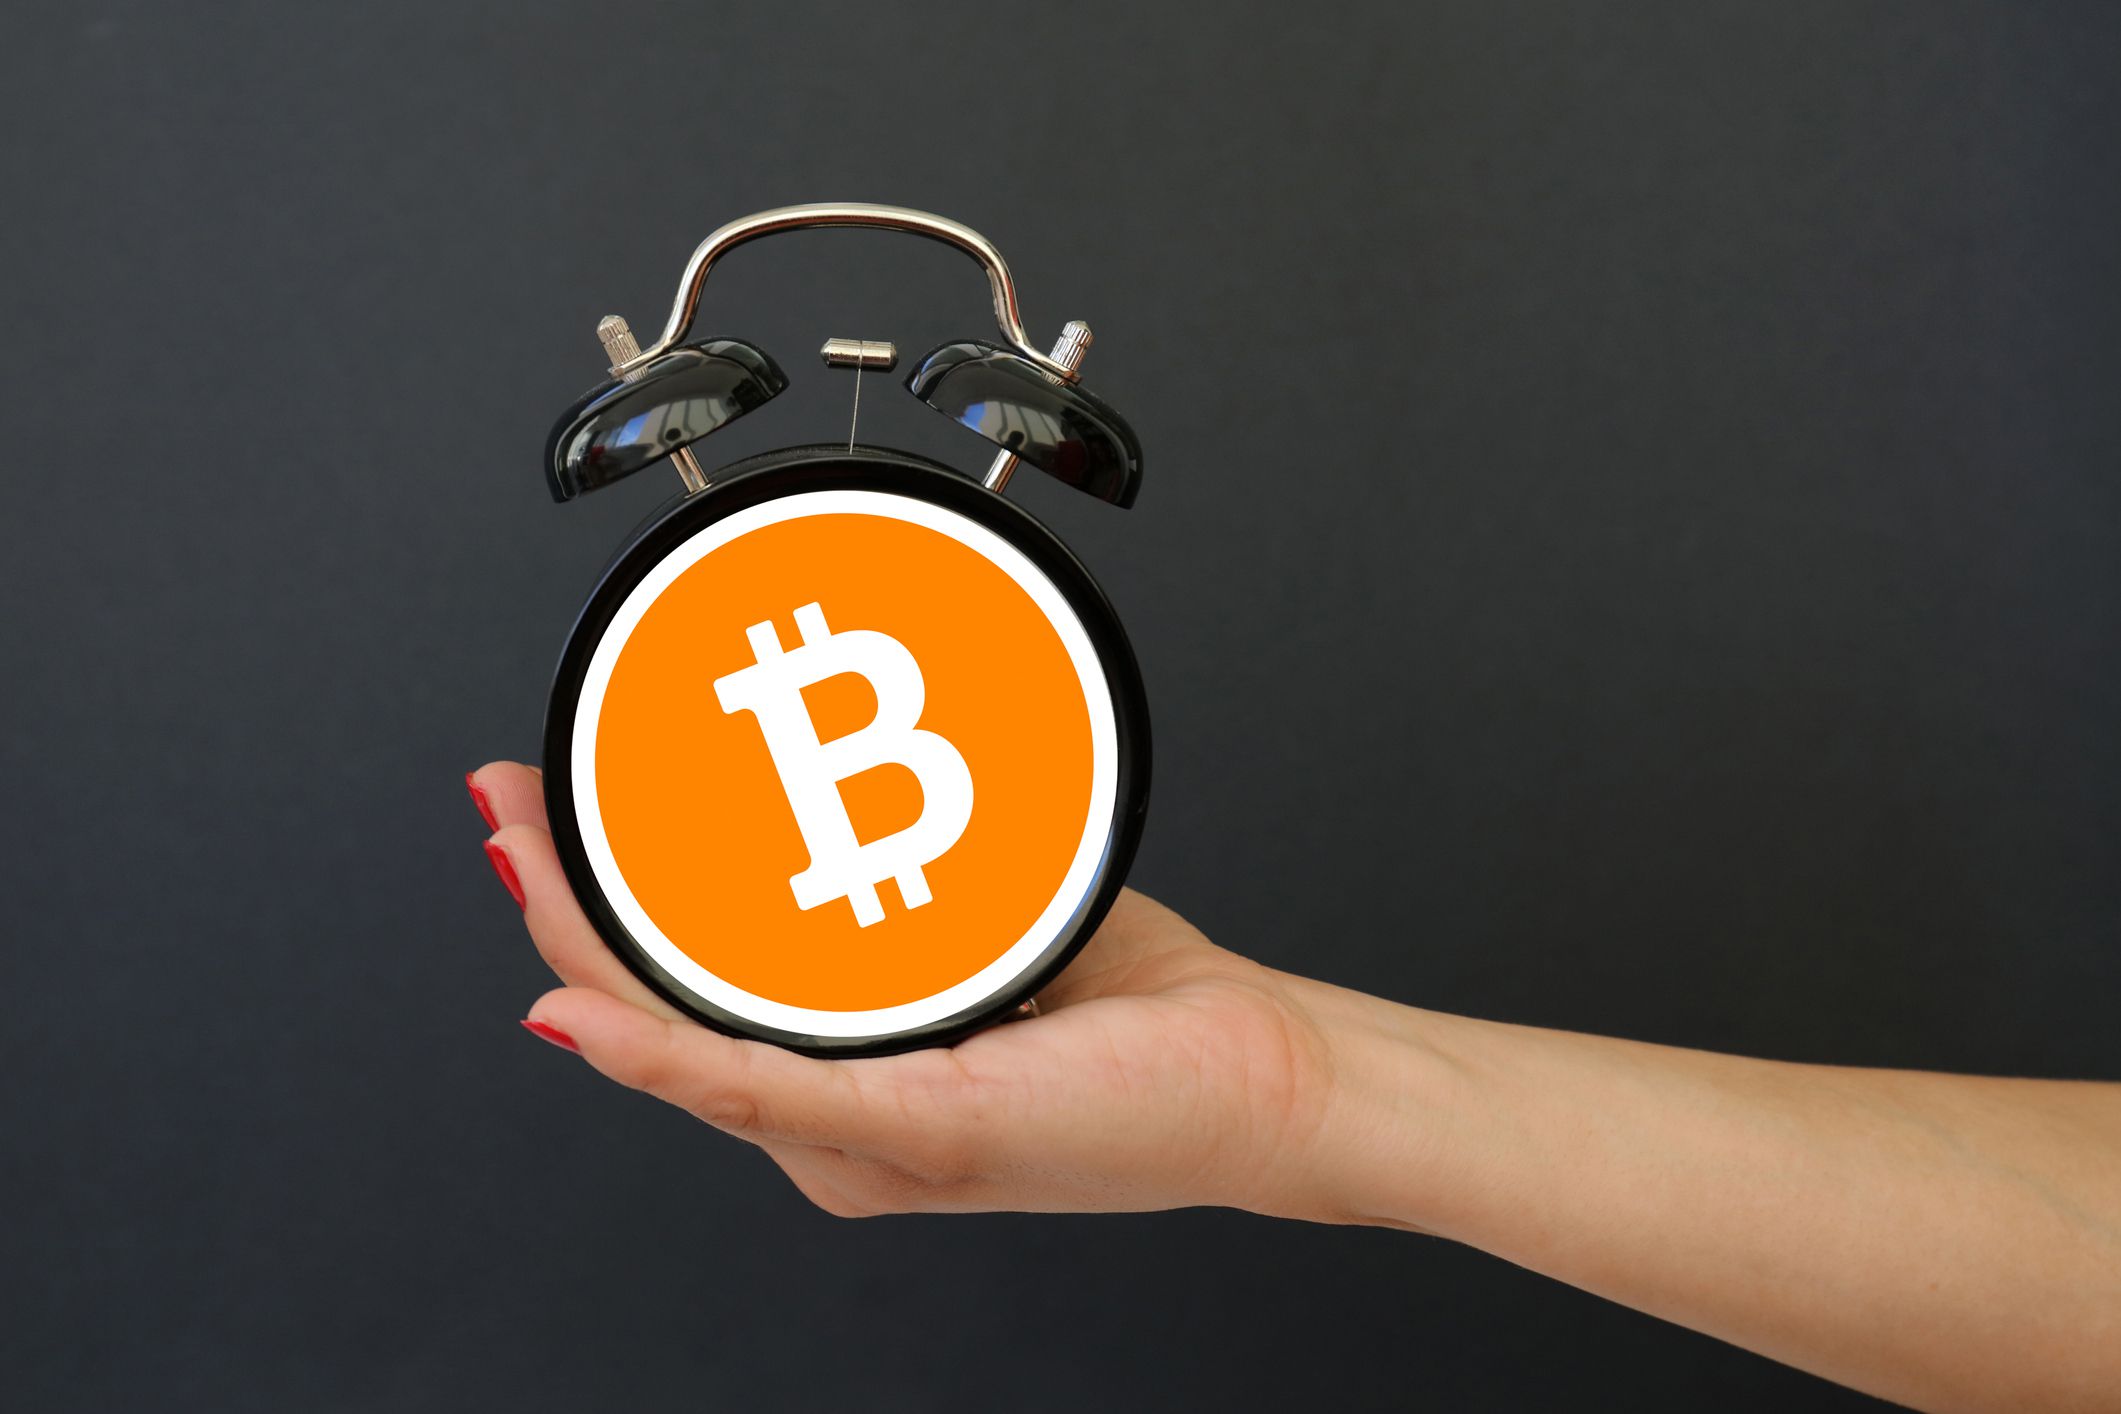 Person holds a clock with a Bitcoin symbol